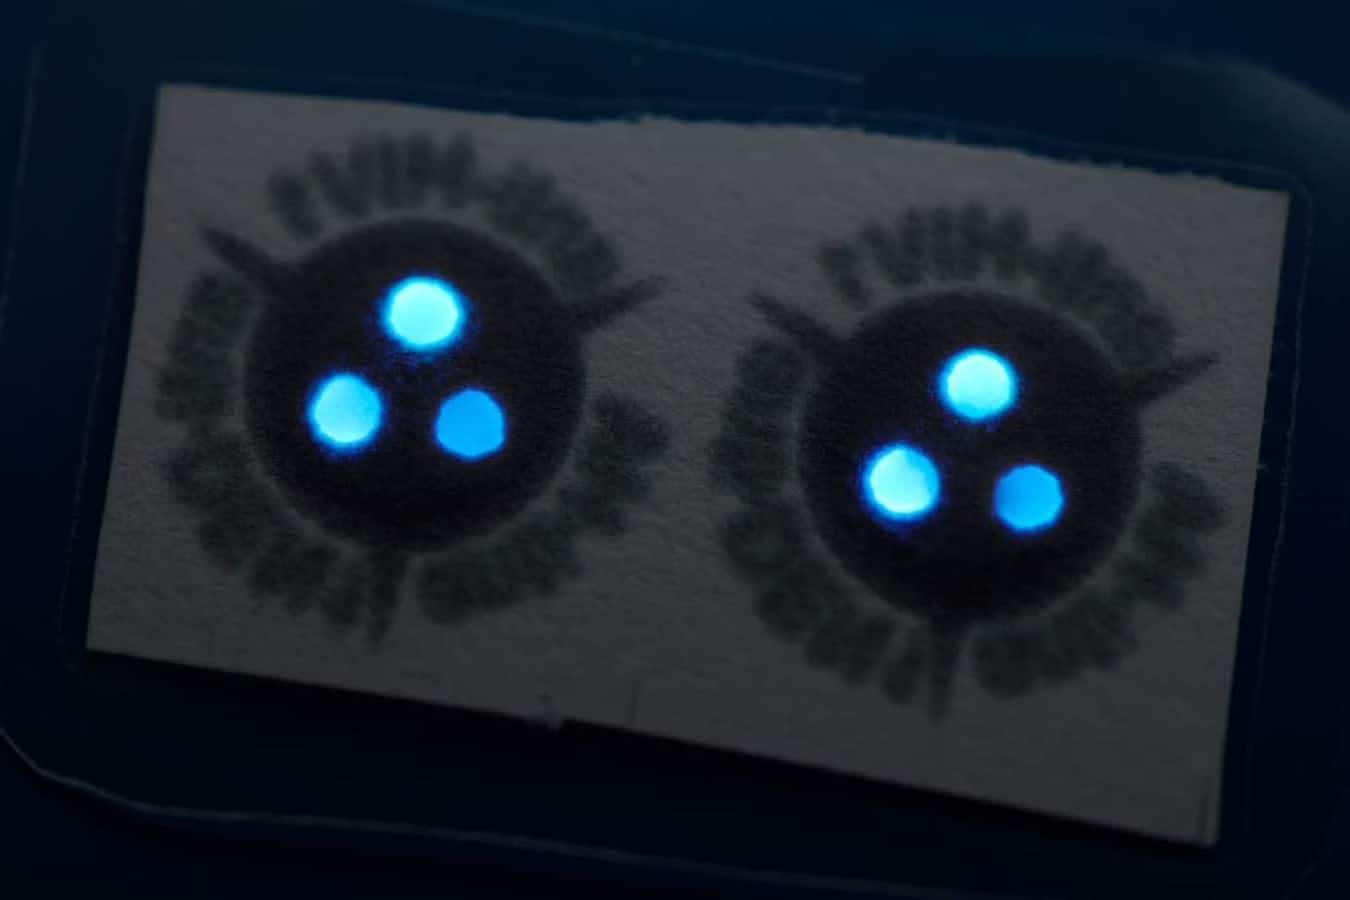 These antibody kits use luciferase, an enzyme used by fireflies to produce their glow, to emit blue light to indicate if an infection is being fought. Image credit - Bart van Overbeeke